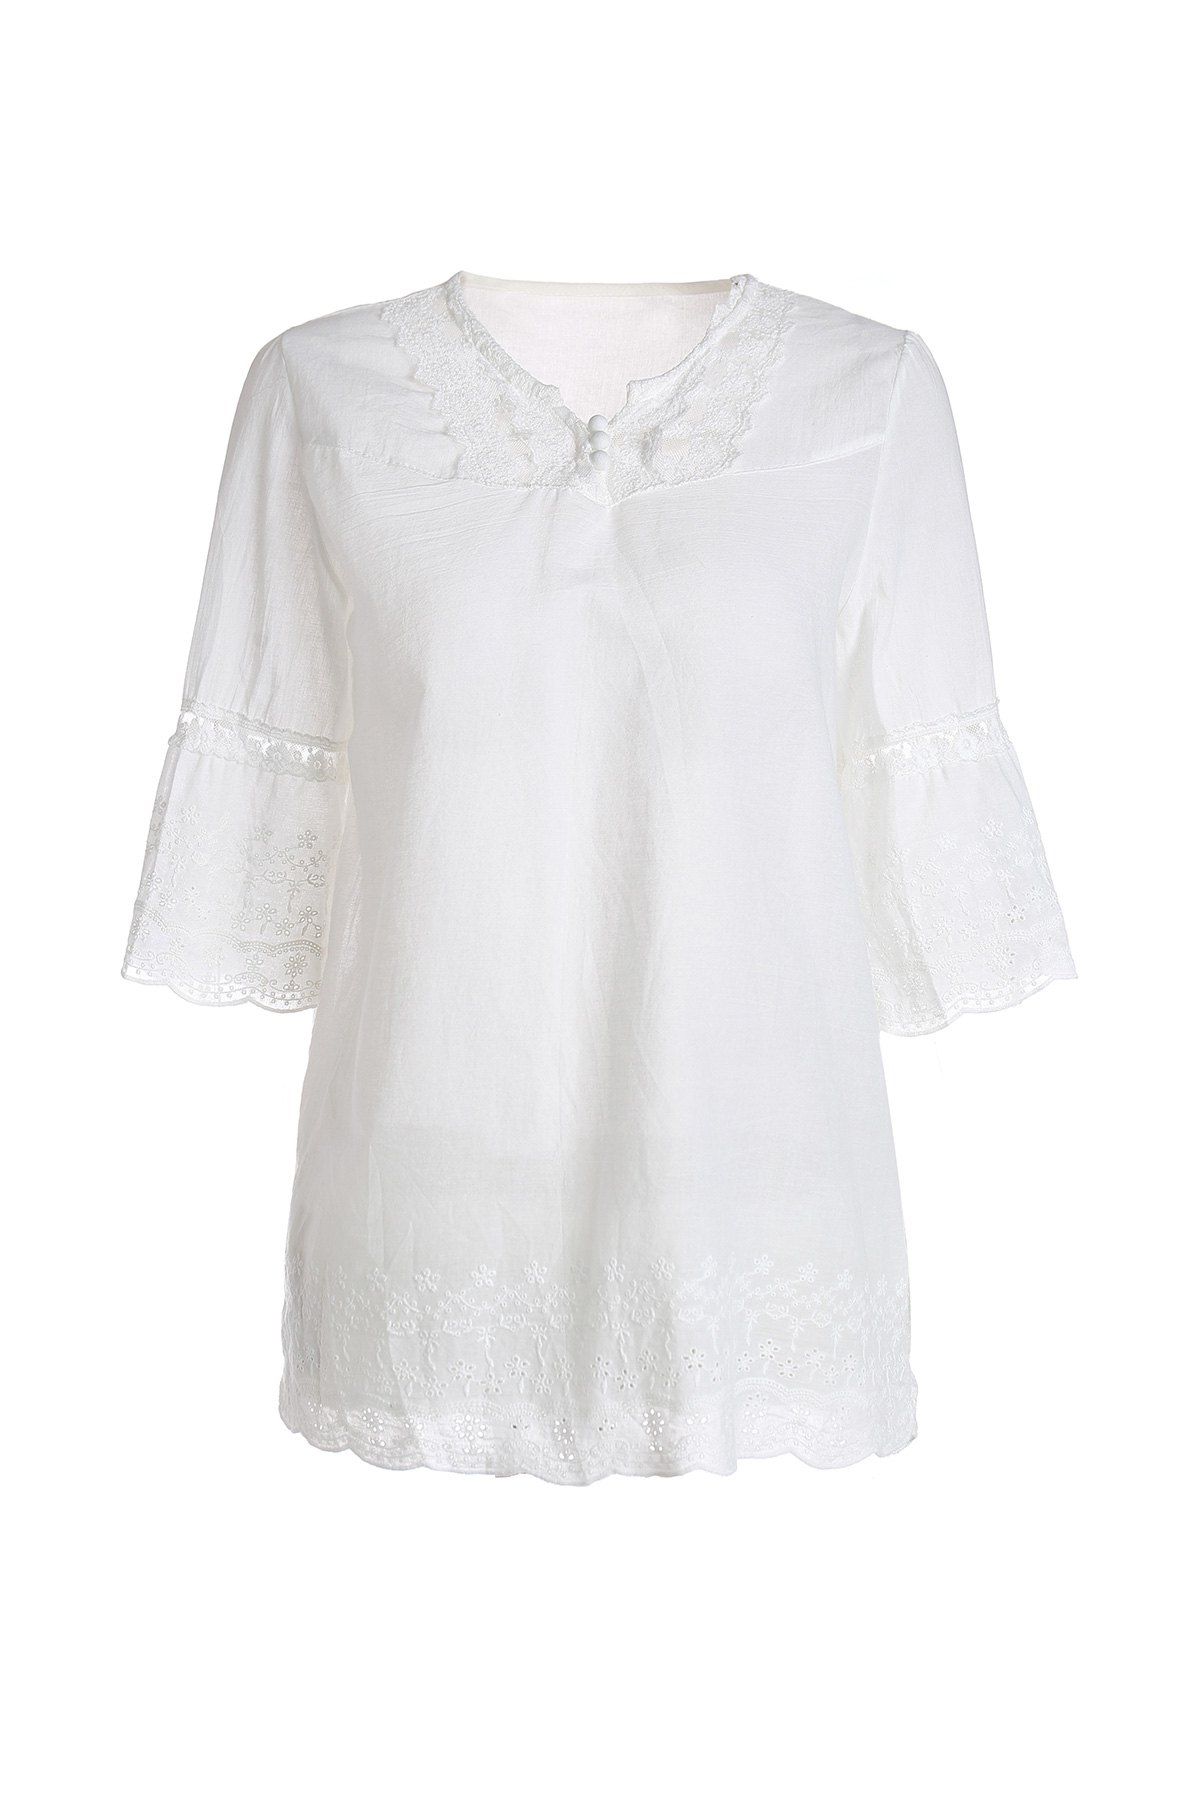 [30% OFF] 2021 Refreshing Style Polyester Short Sleeves V-Neck Lace ...